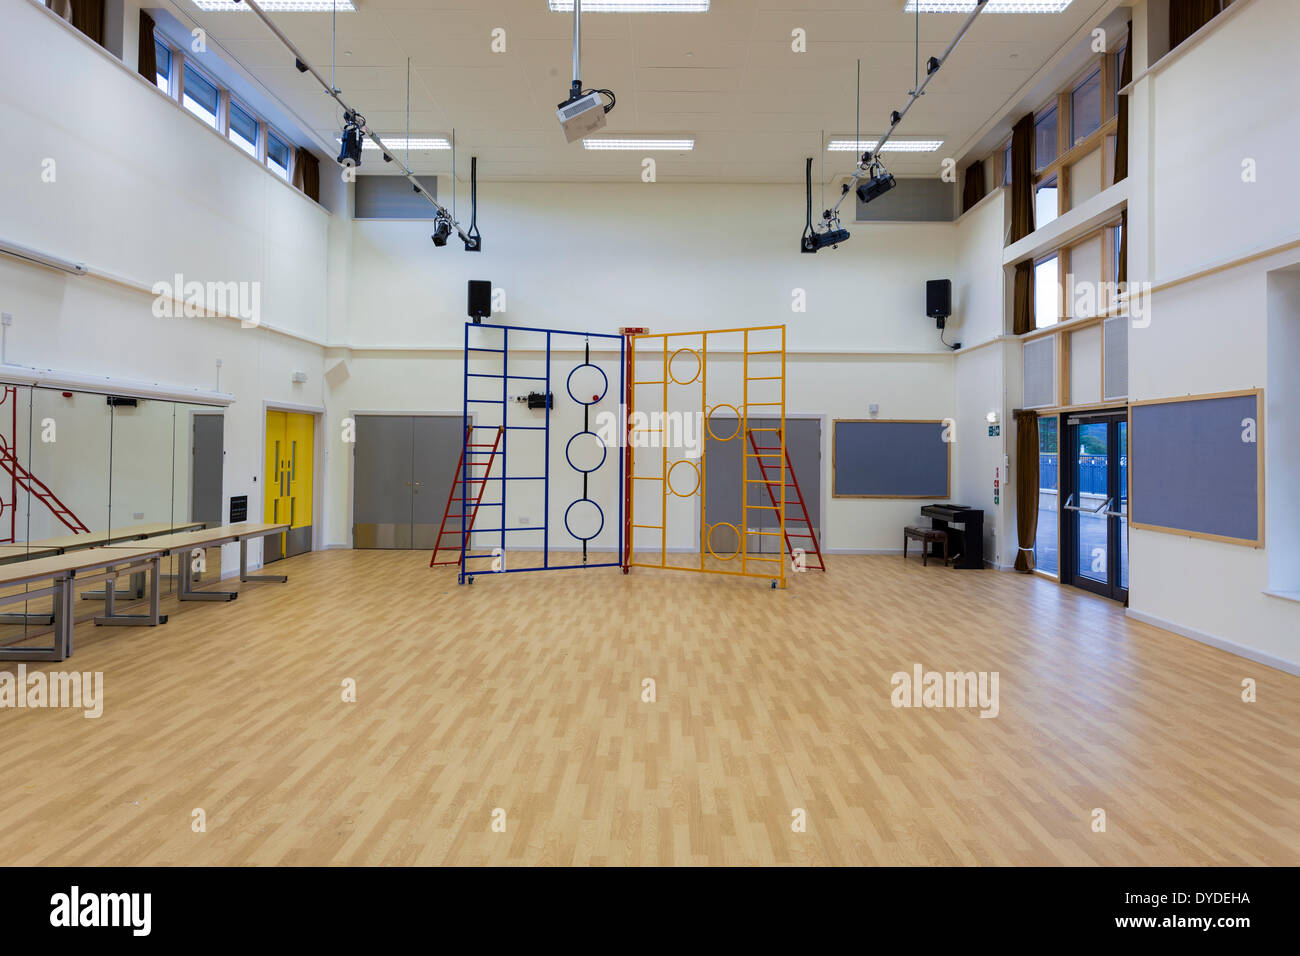 Wooden floored school hall with climbing equipment. Stock Photo